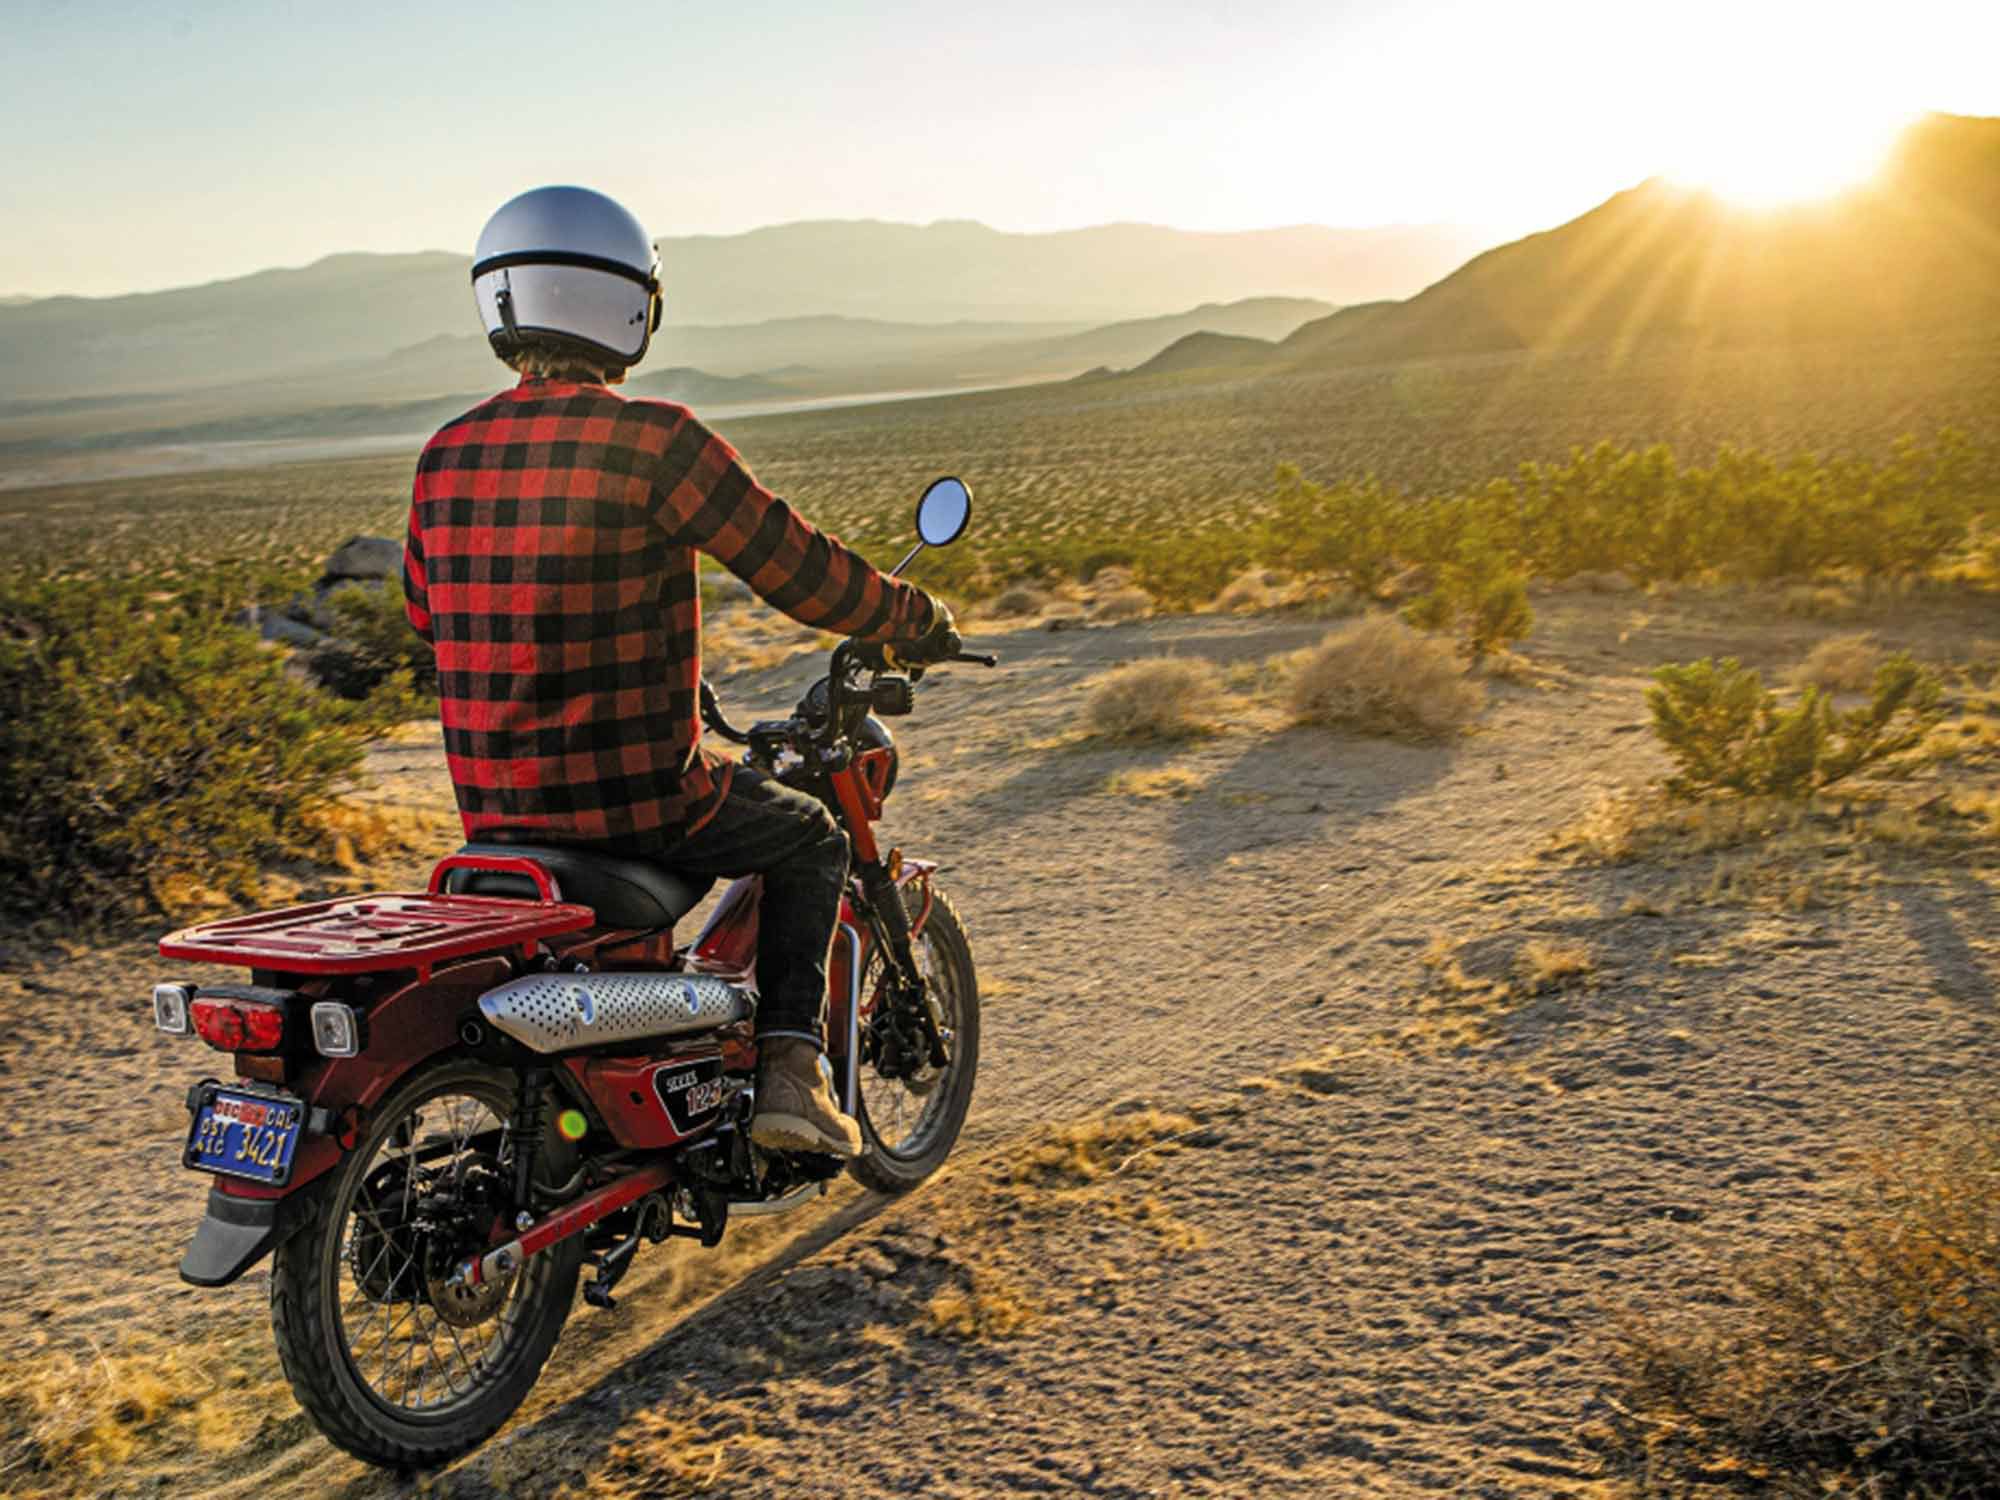 The Trail 125’s easy operation and capable off-road manners will keep you chasing the sun over that next hill.